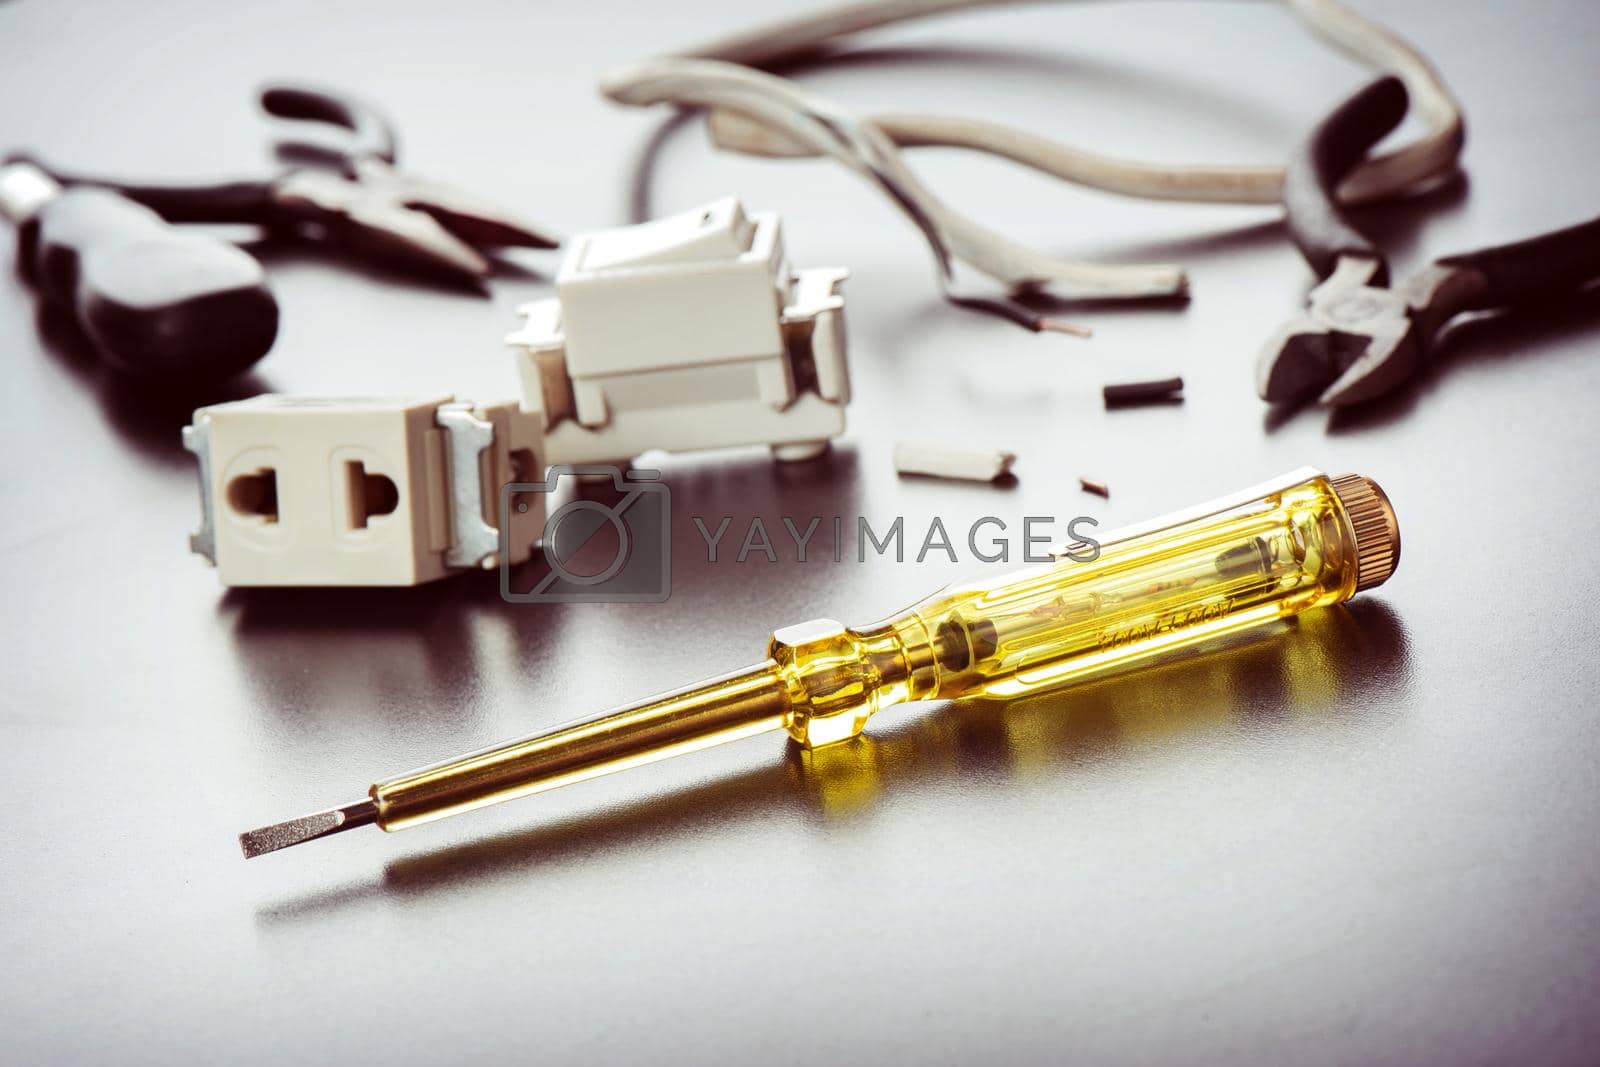 Royalty free image of electrical tester screwdriver by norgal